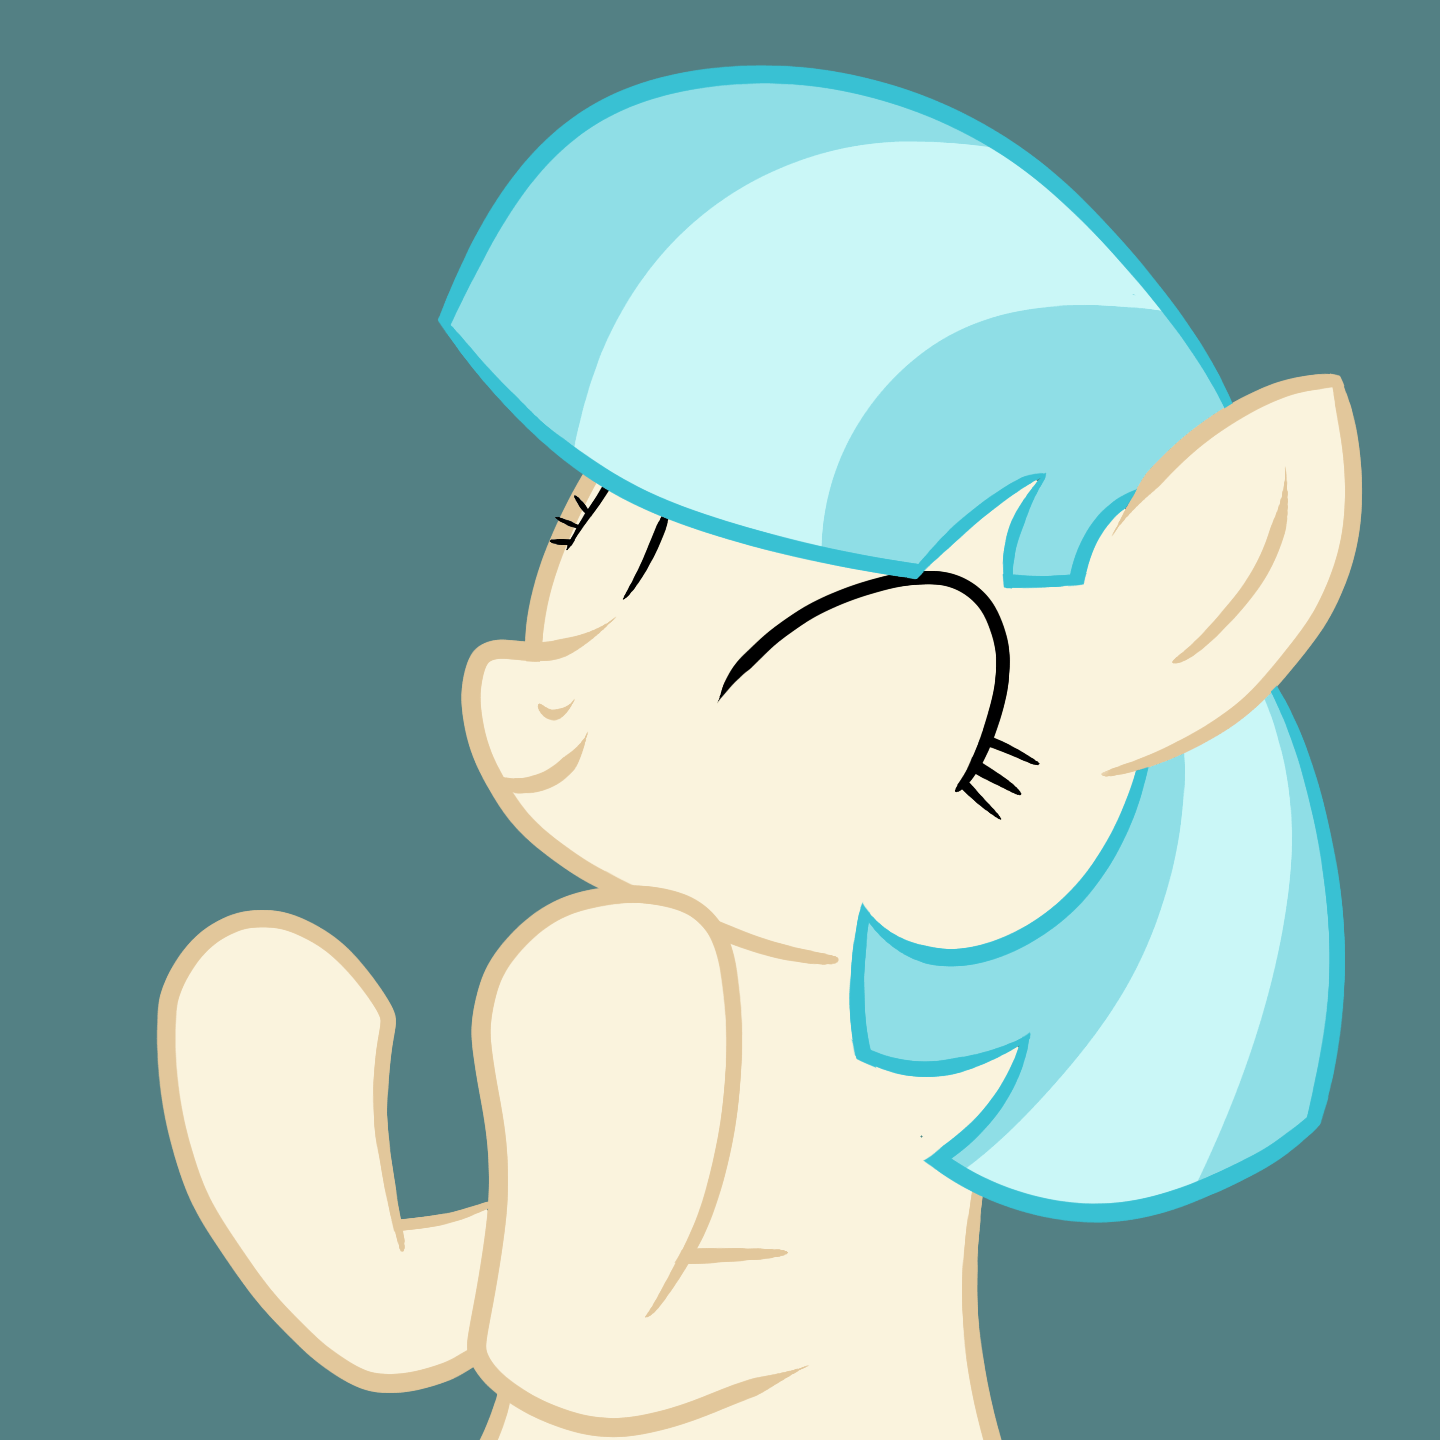 coco_pommel_clap_by_bronyxceed-d73g50f.g